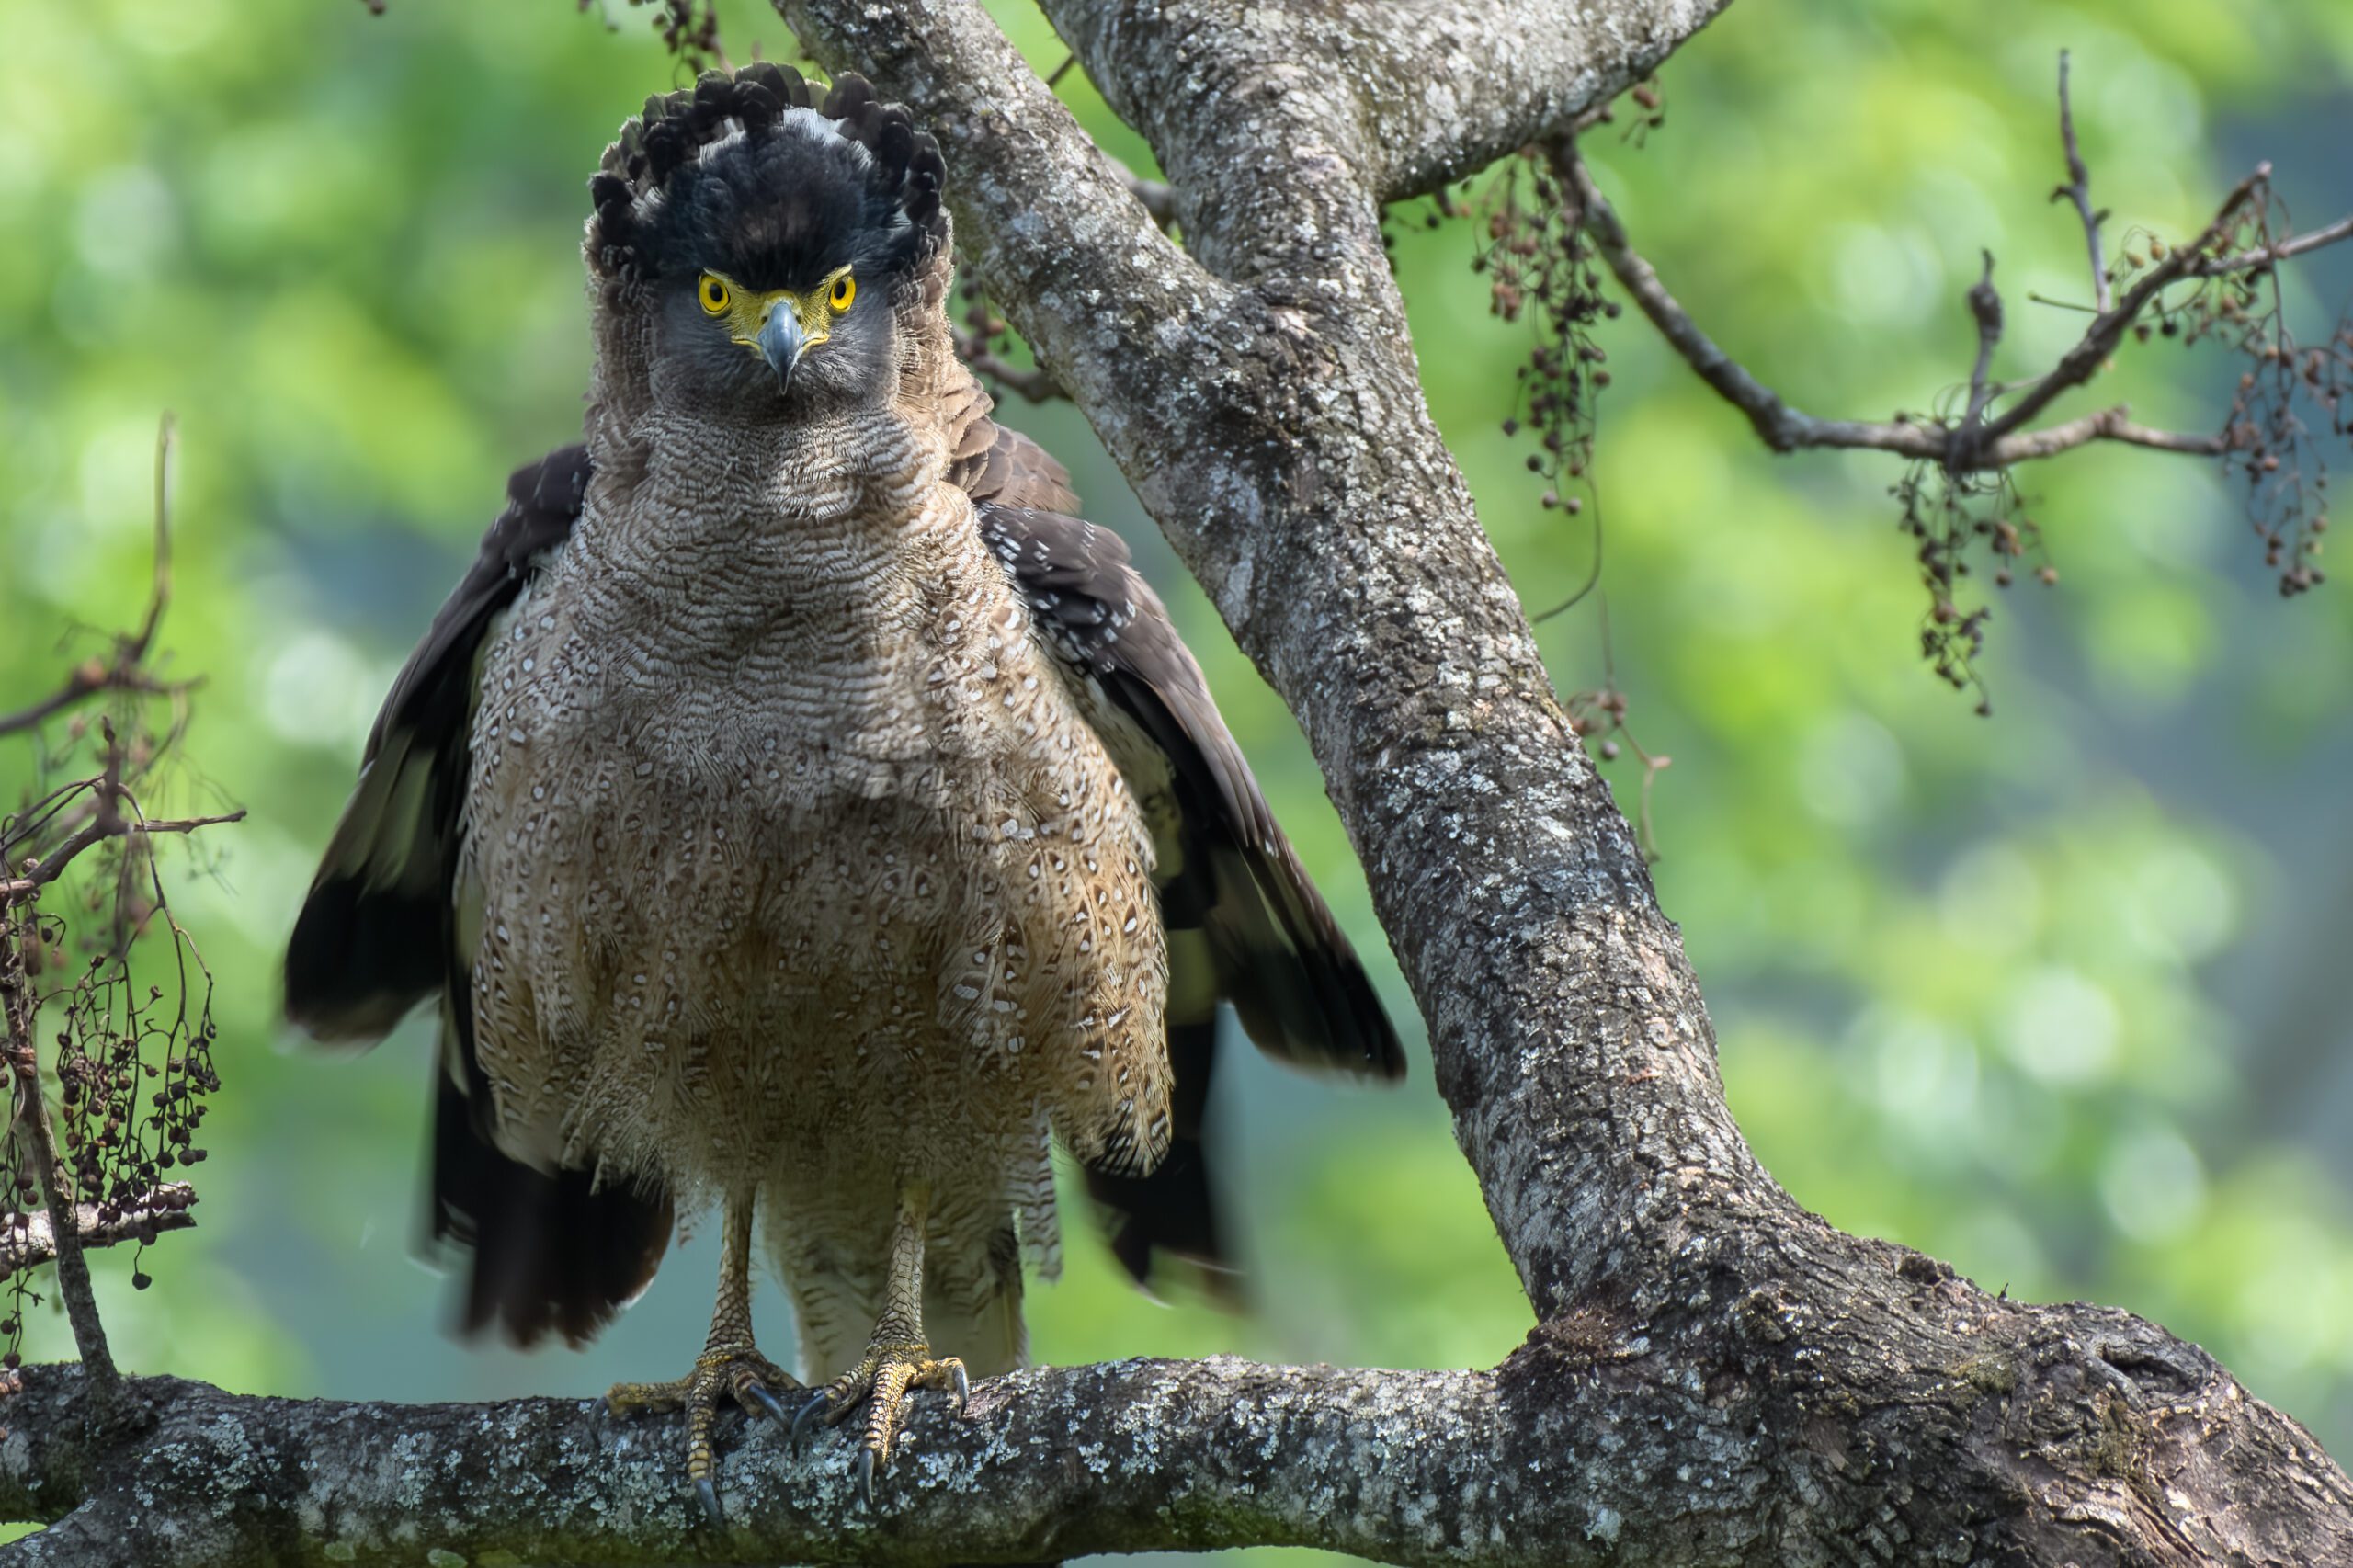 A large grey-brown patterned bird with yellow eyes and a crown of feathers looks at the camera.